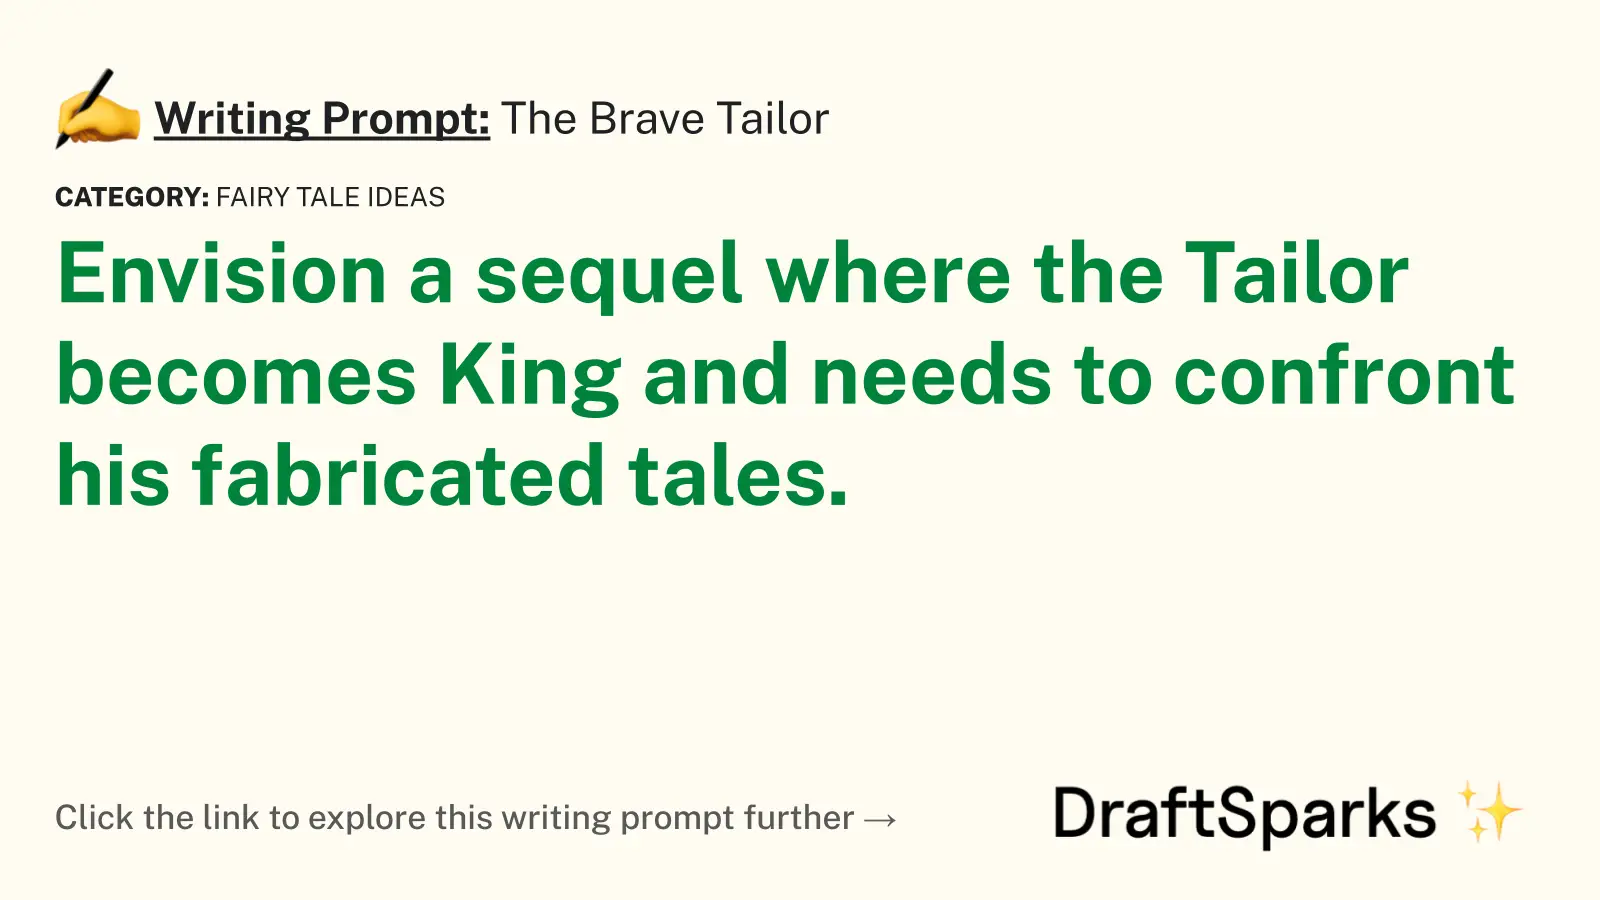 The Brave Tailor